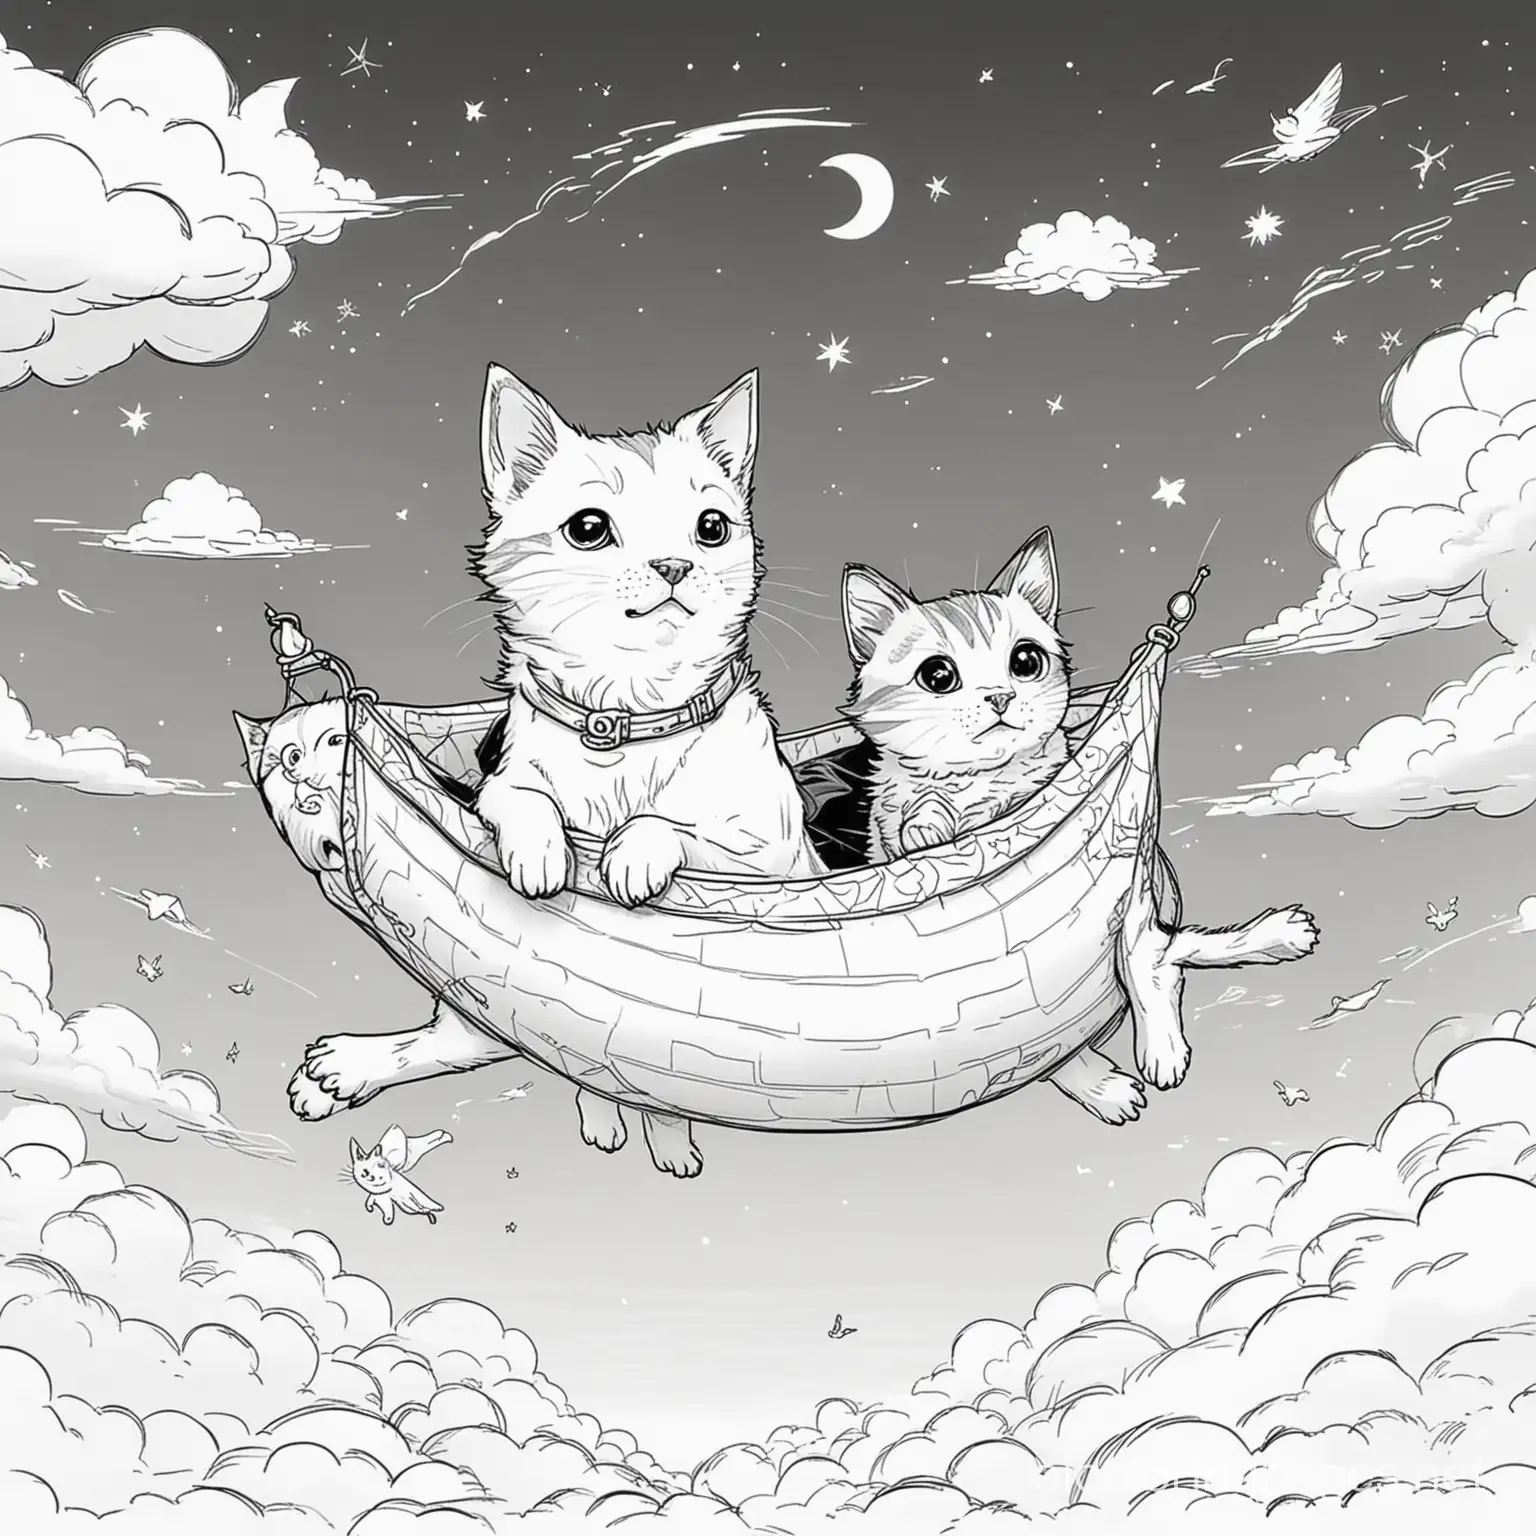 Joyful-Dog-and-Cat-Floating-in-Sky-Coloring-Page